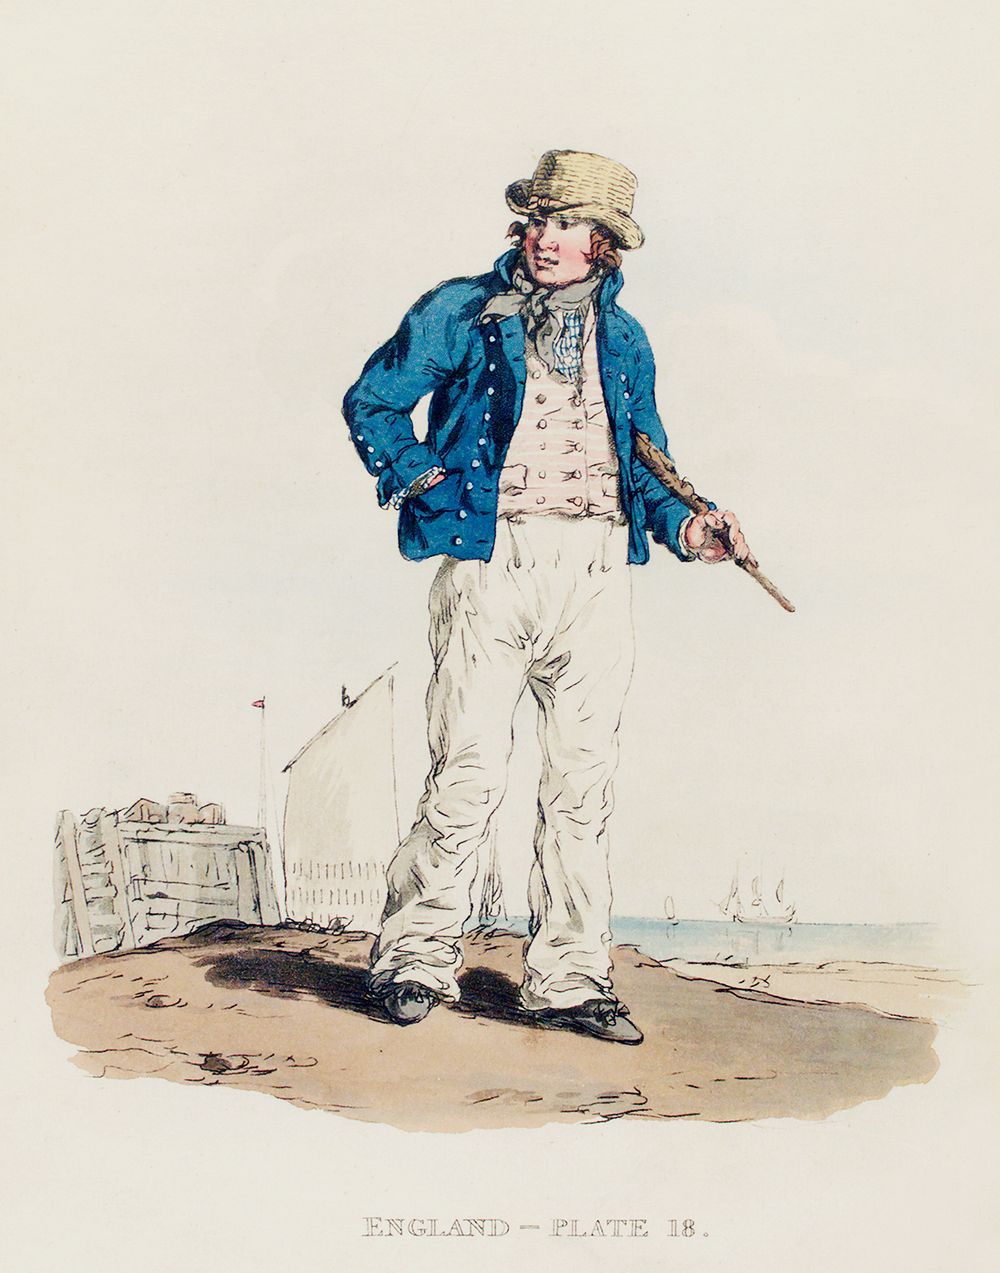 Illustration of a sailor from Picturesque Representations of the Dress and Manners of the English(1814) by William Alexander…